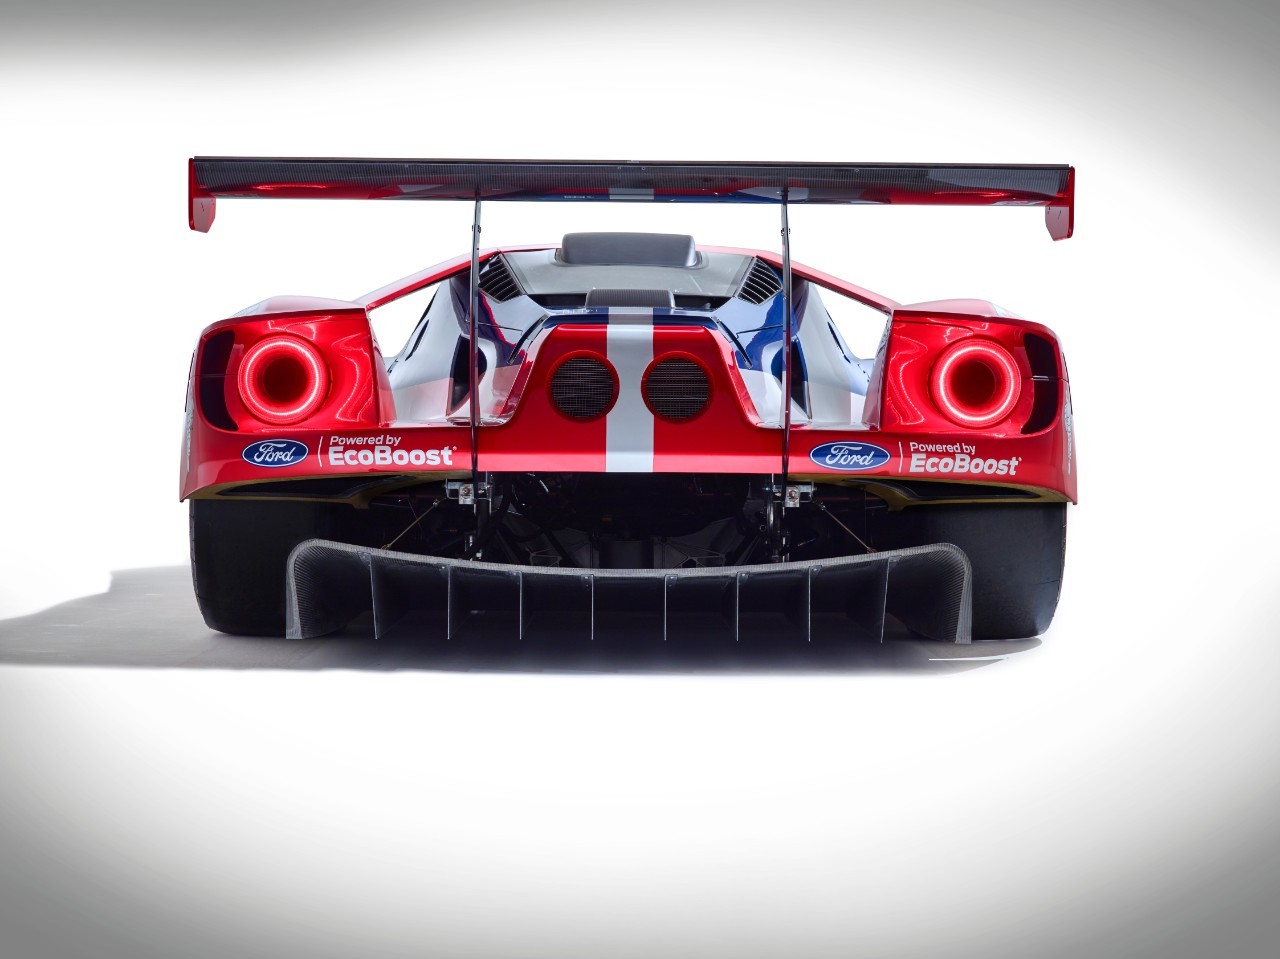 ford-gt-le-mans-racecar-confirmed-to-debut-at-the-2016-rolex-24-at-daytona-video-photo-gallery_8.jpg